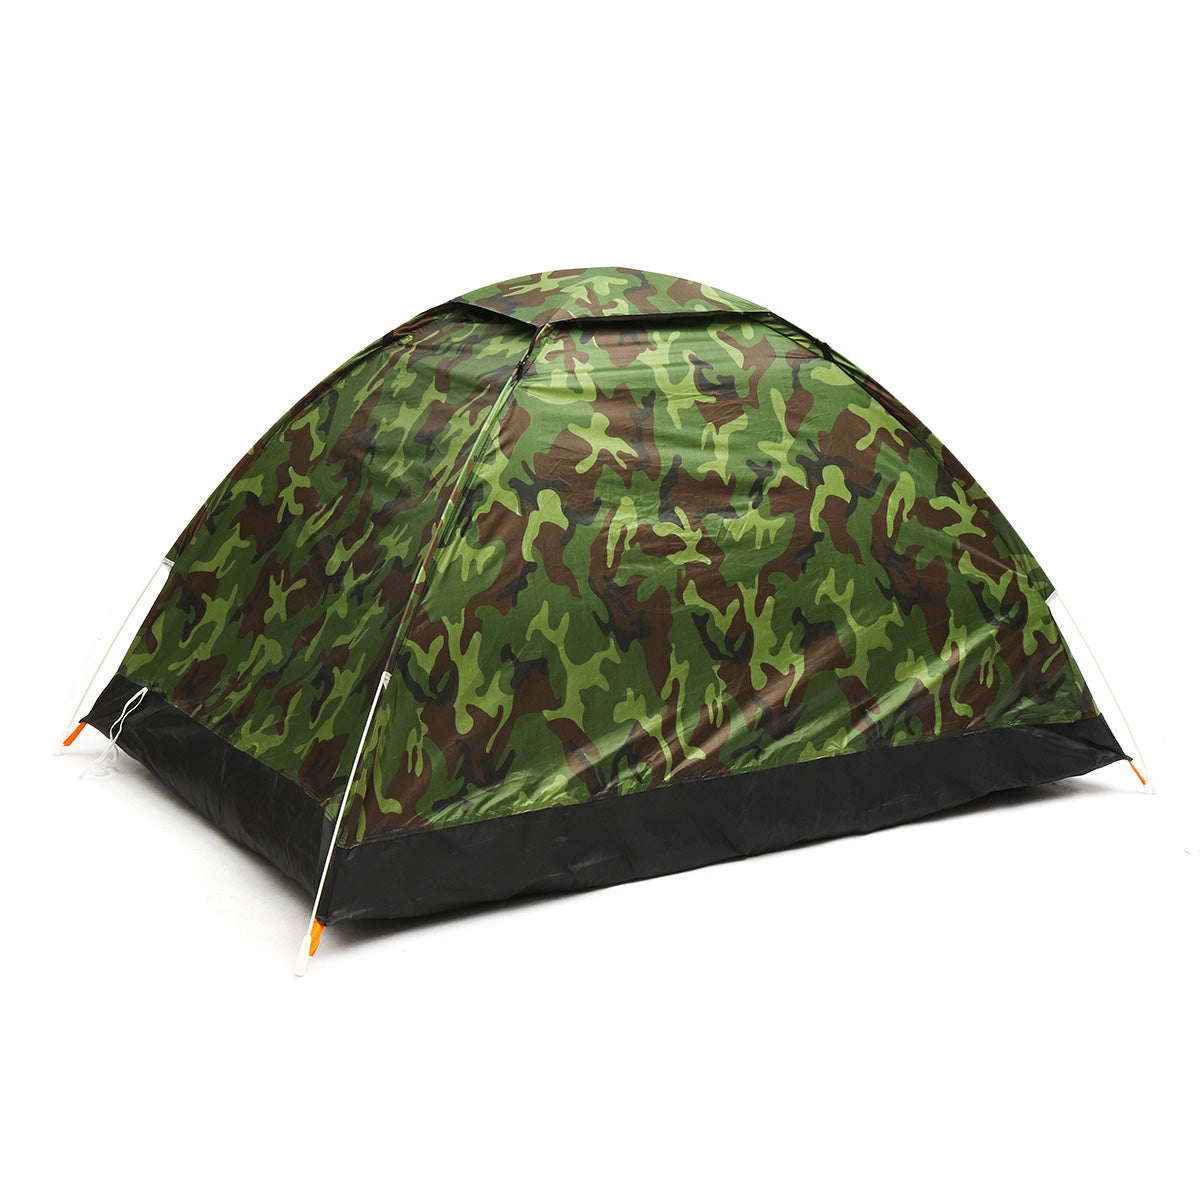 1-2 Person Automatic Camping Tent Waterproof Quick Shelter Sunshade Canopy Outdoor Travel Hiking